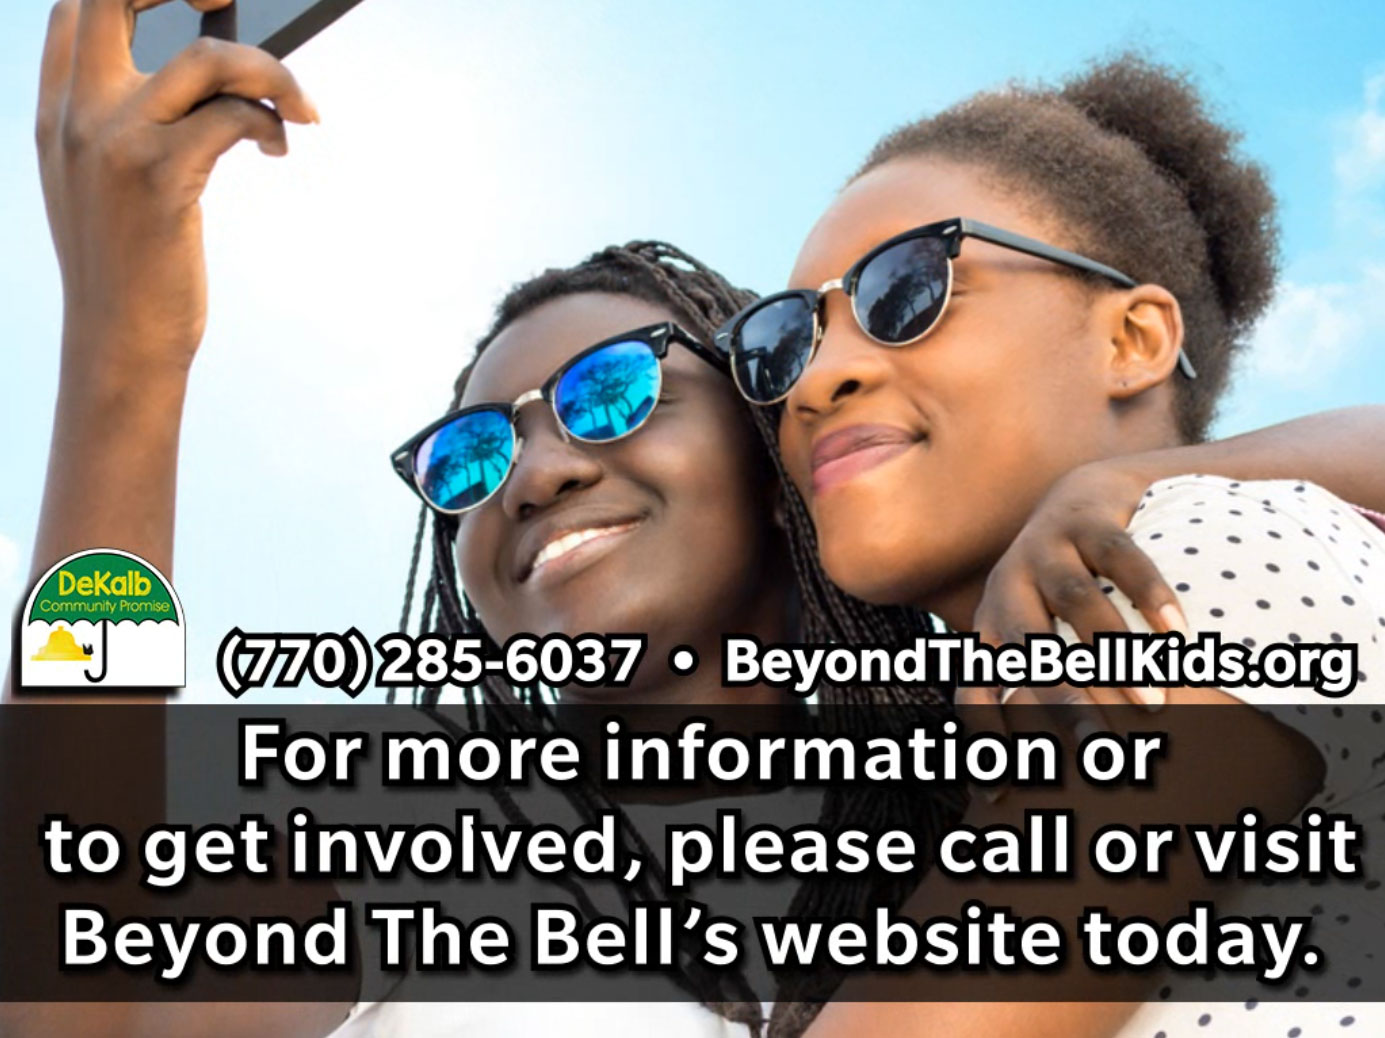 Two African American girls wearing sunglasses taking a selfie. The caption reads "For more information or to get involved, please call or visit Beyond the Bell's website today."